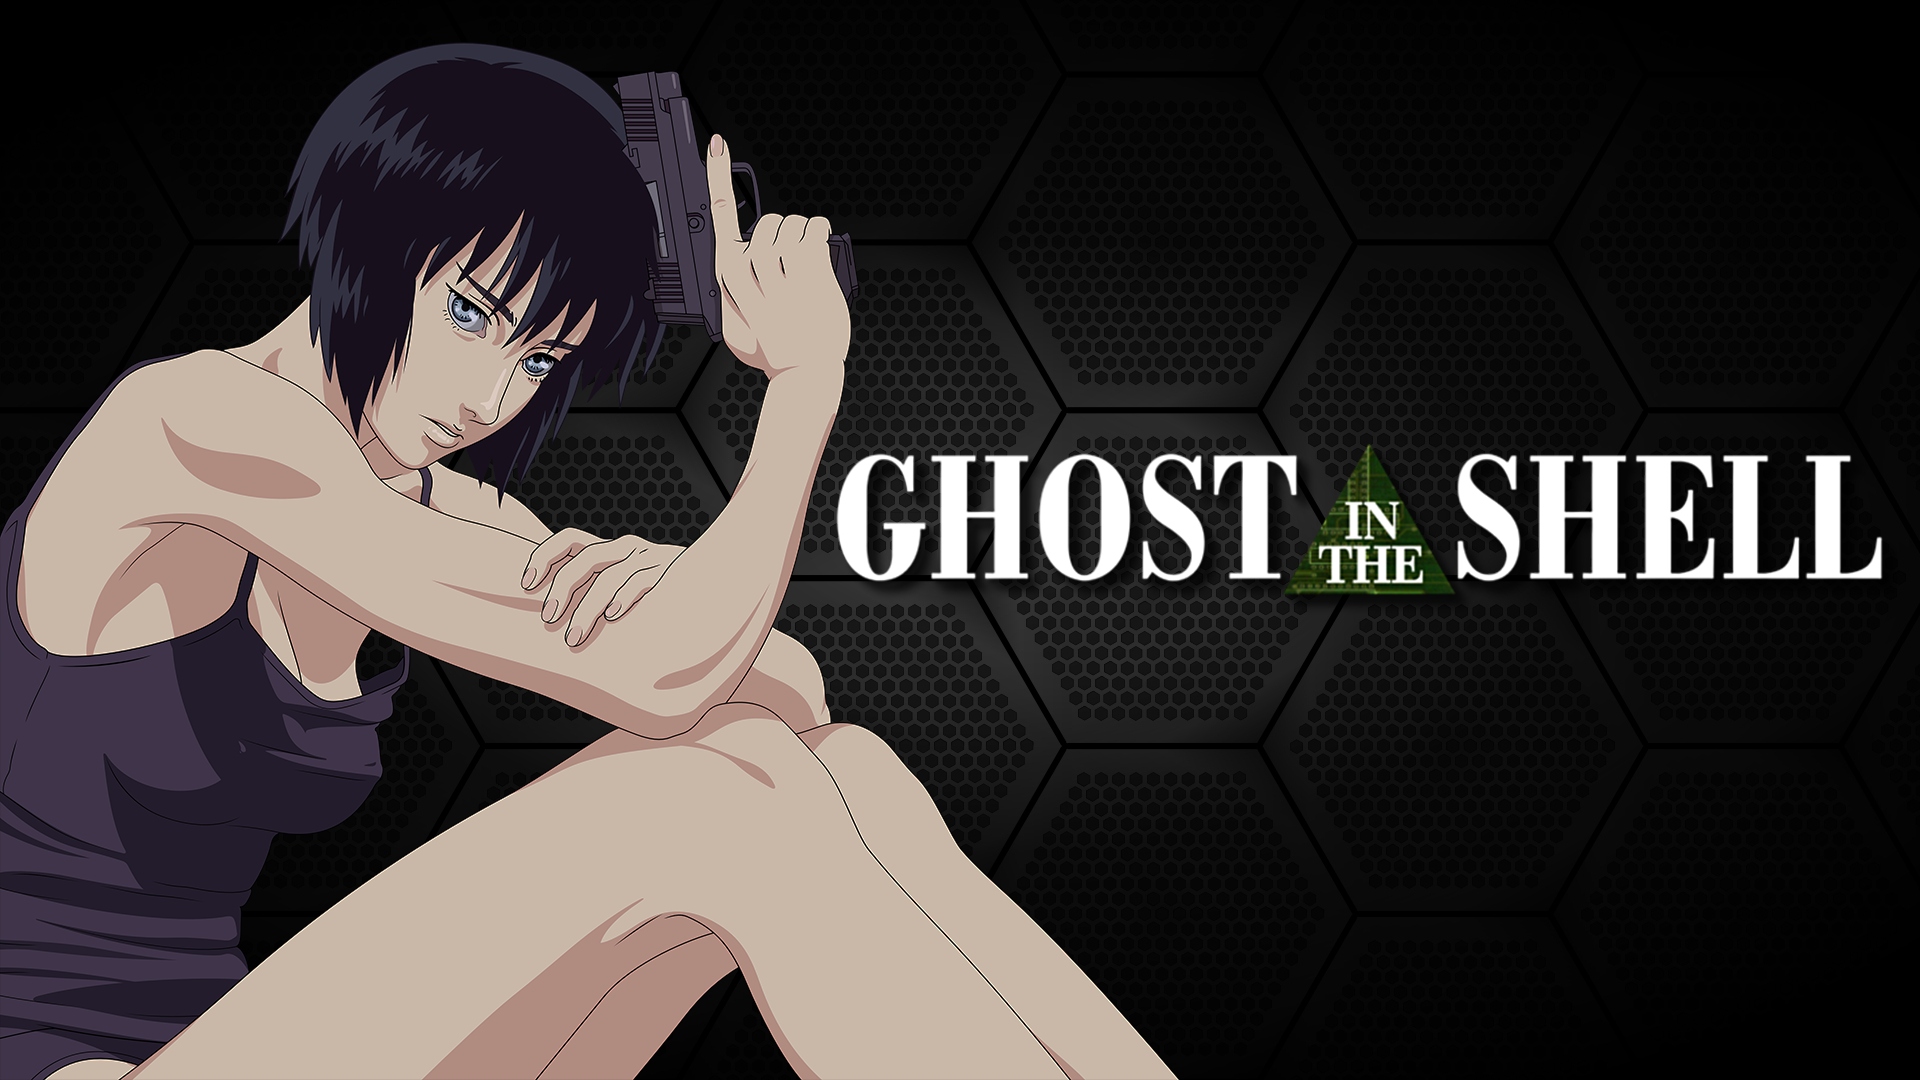 Anime Ghost In The Shell 1920x1080